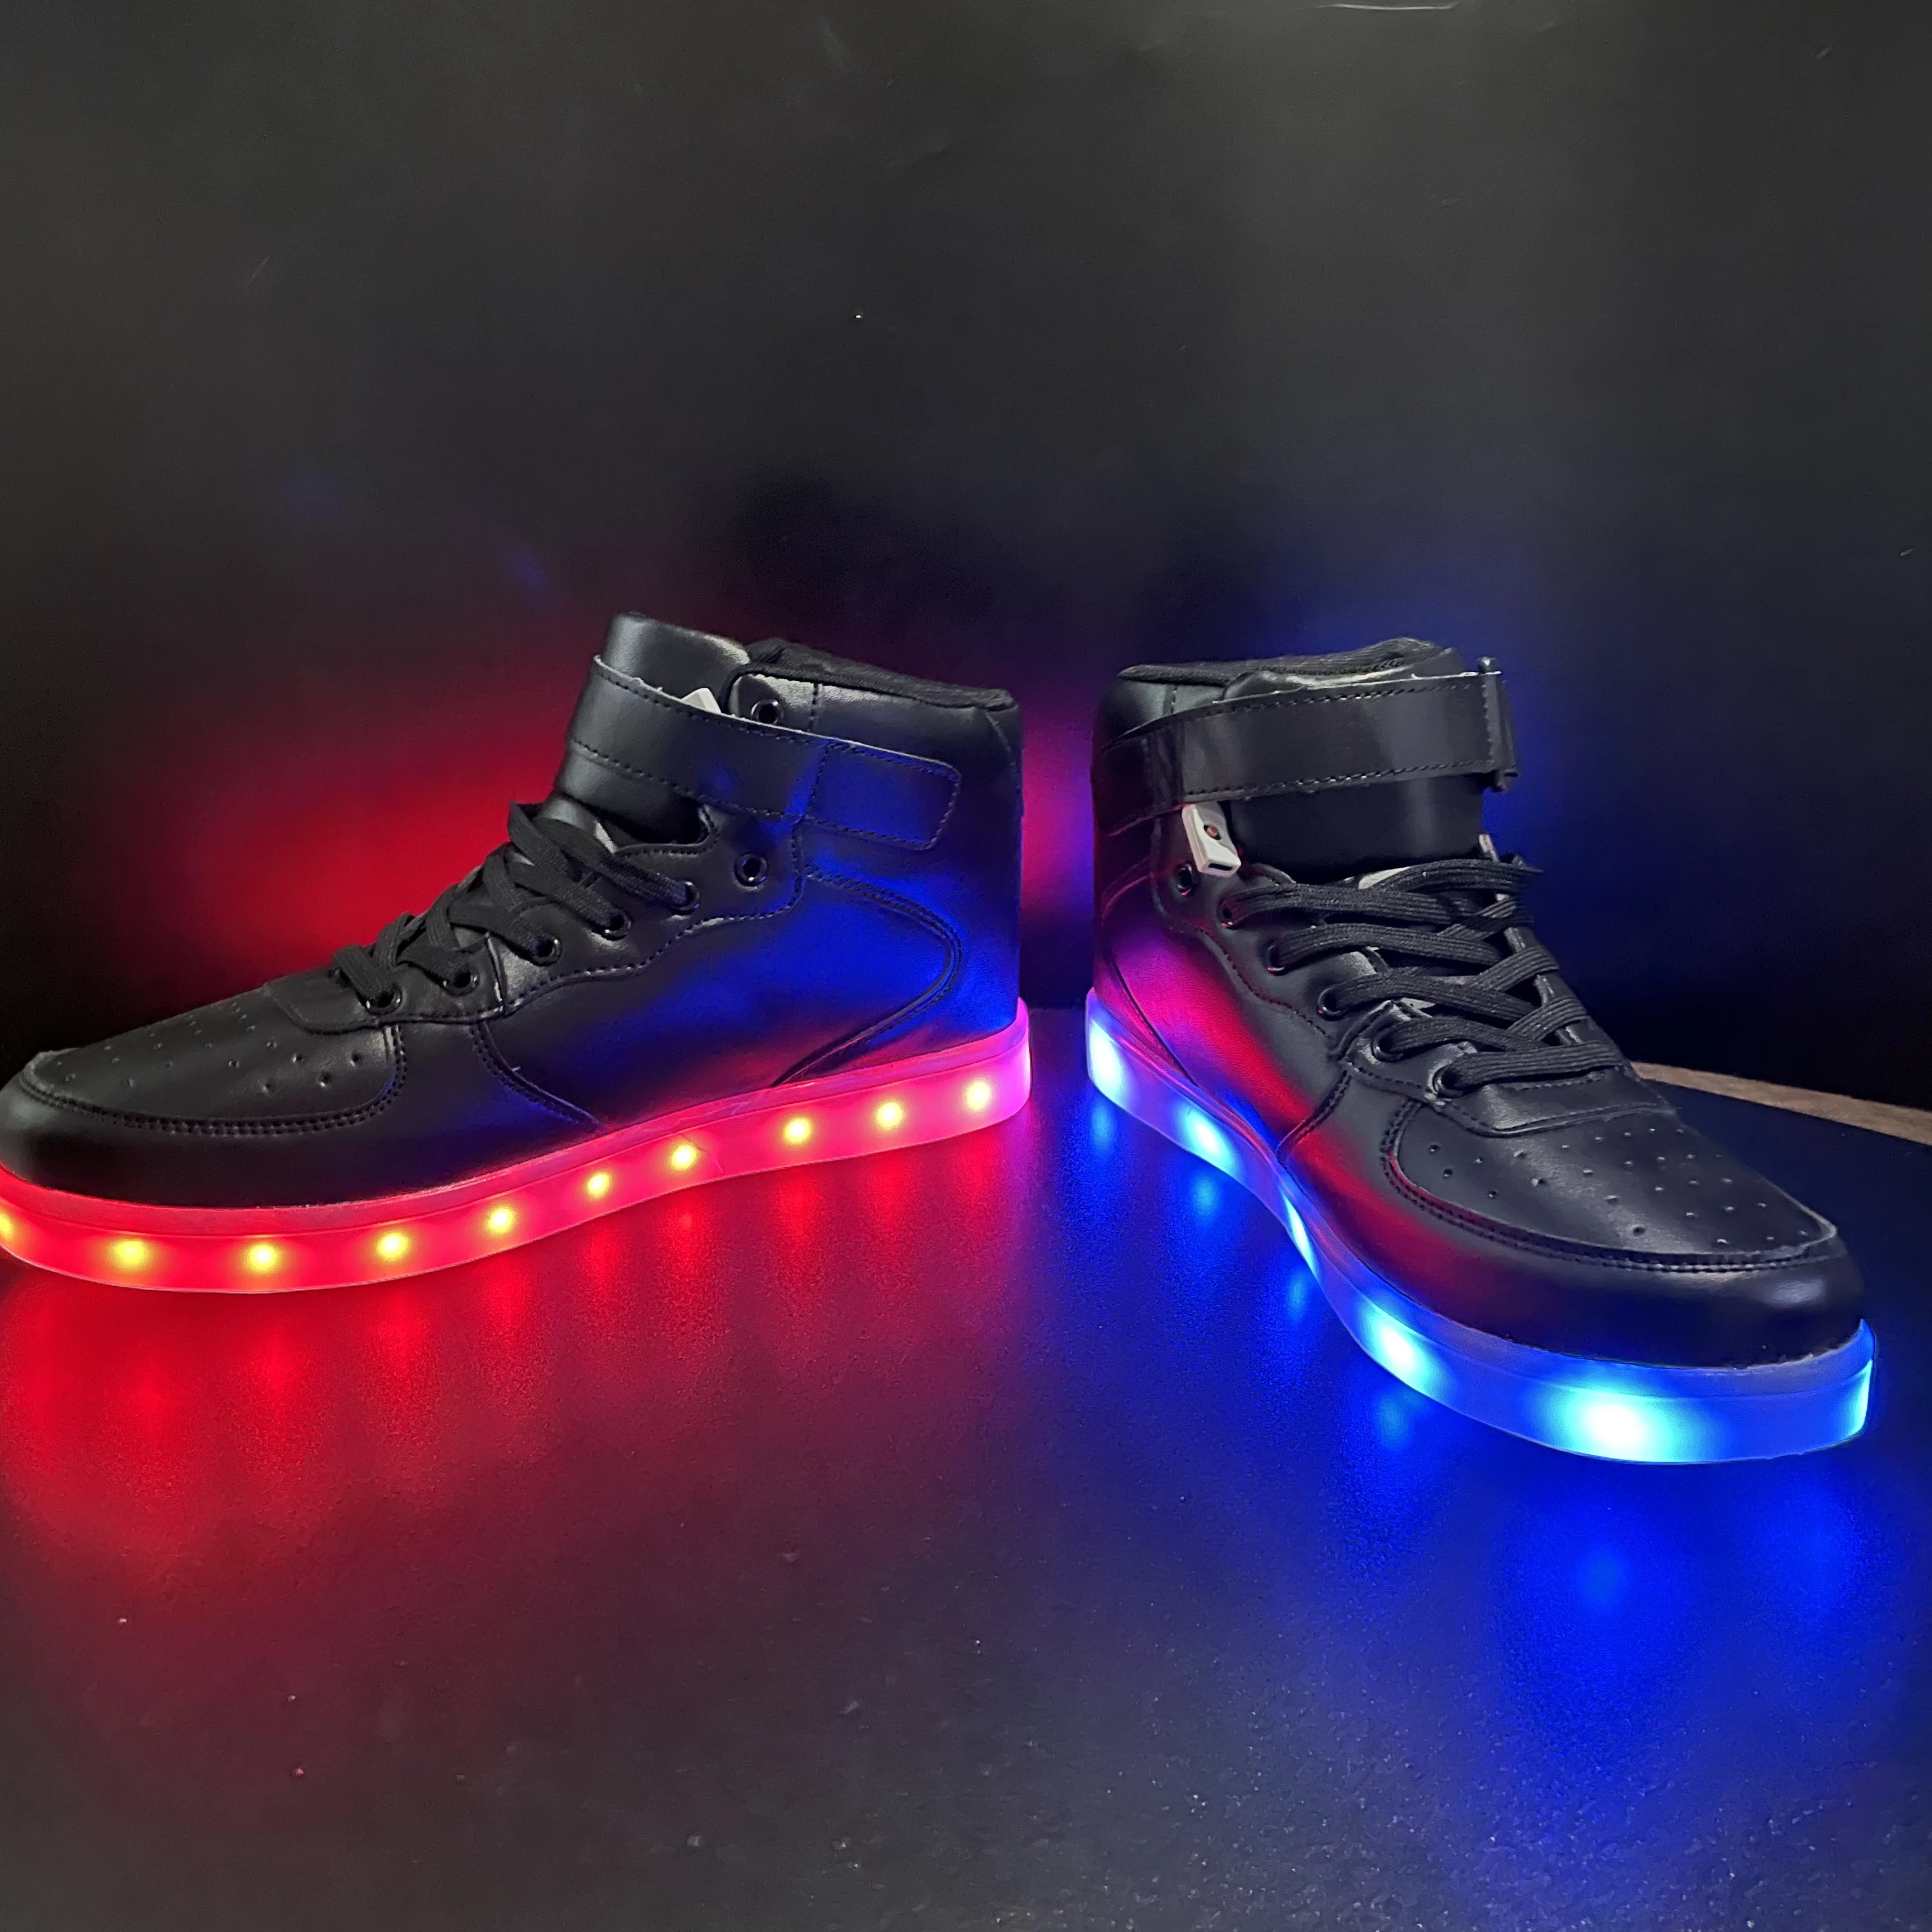 Mos Hoopvol Nachtvlek Multi-color Led Light Up Usb Rechargable Shoes Mobile Phone Controlled Shoe  Sneakers For Outside Running Edc - Buy Led Shoes For Edc,Fashion Sneakers,Luminous  Shoes Product on Alibaba.com